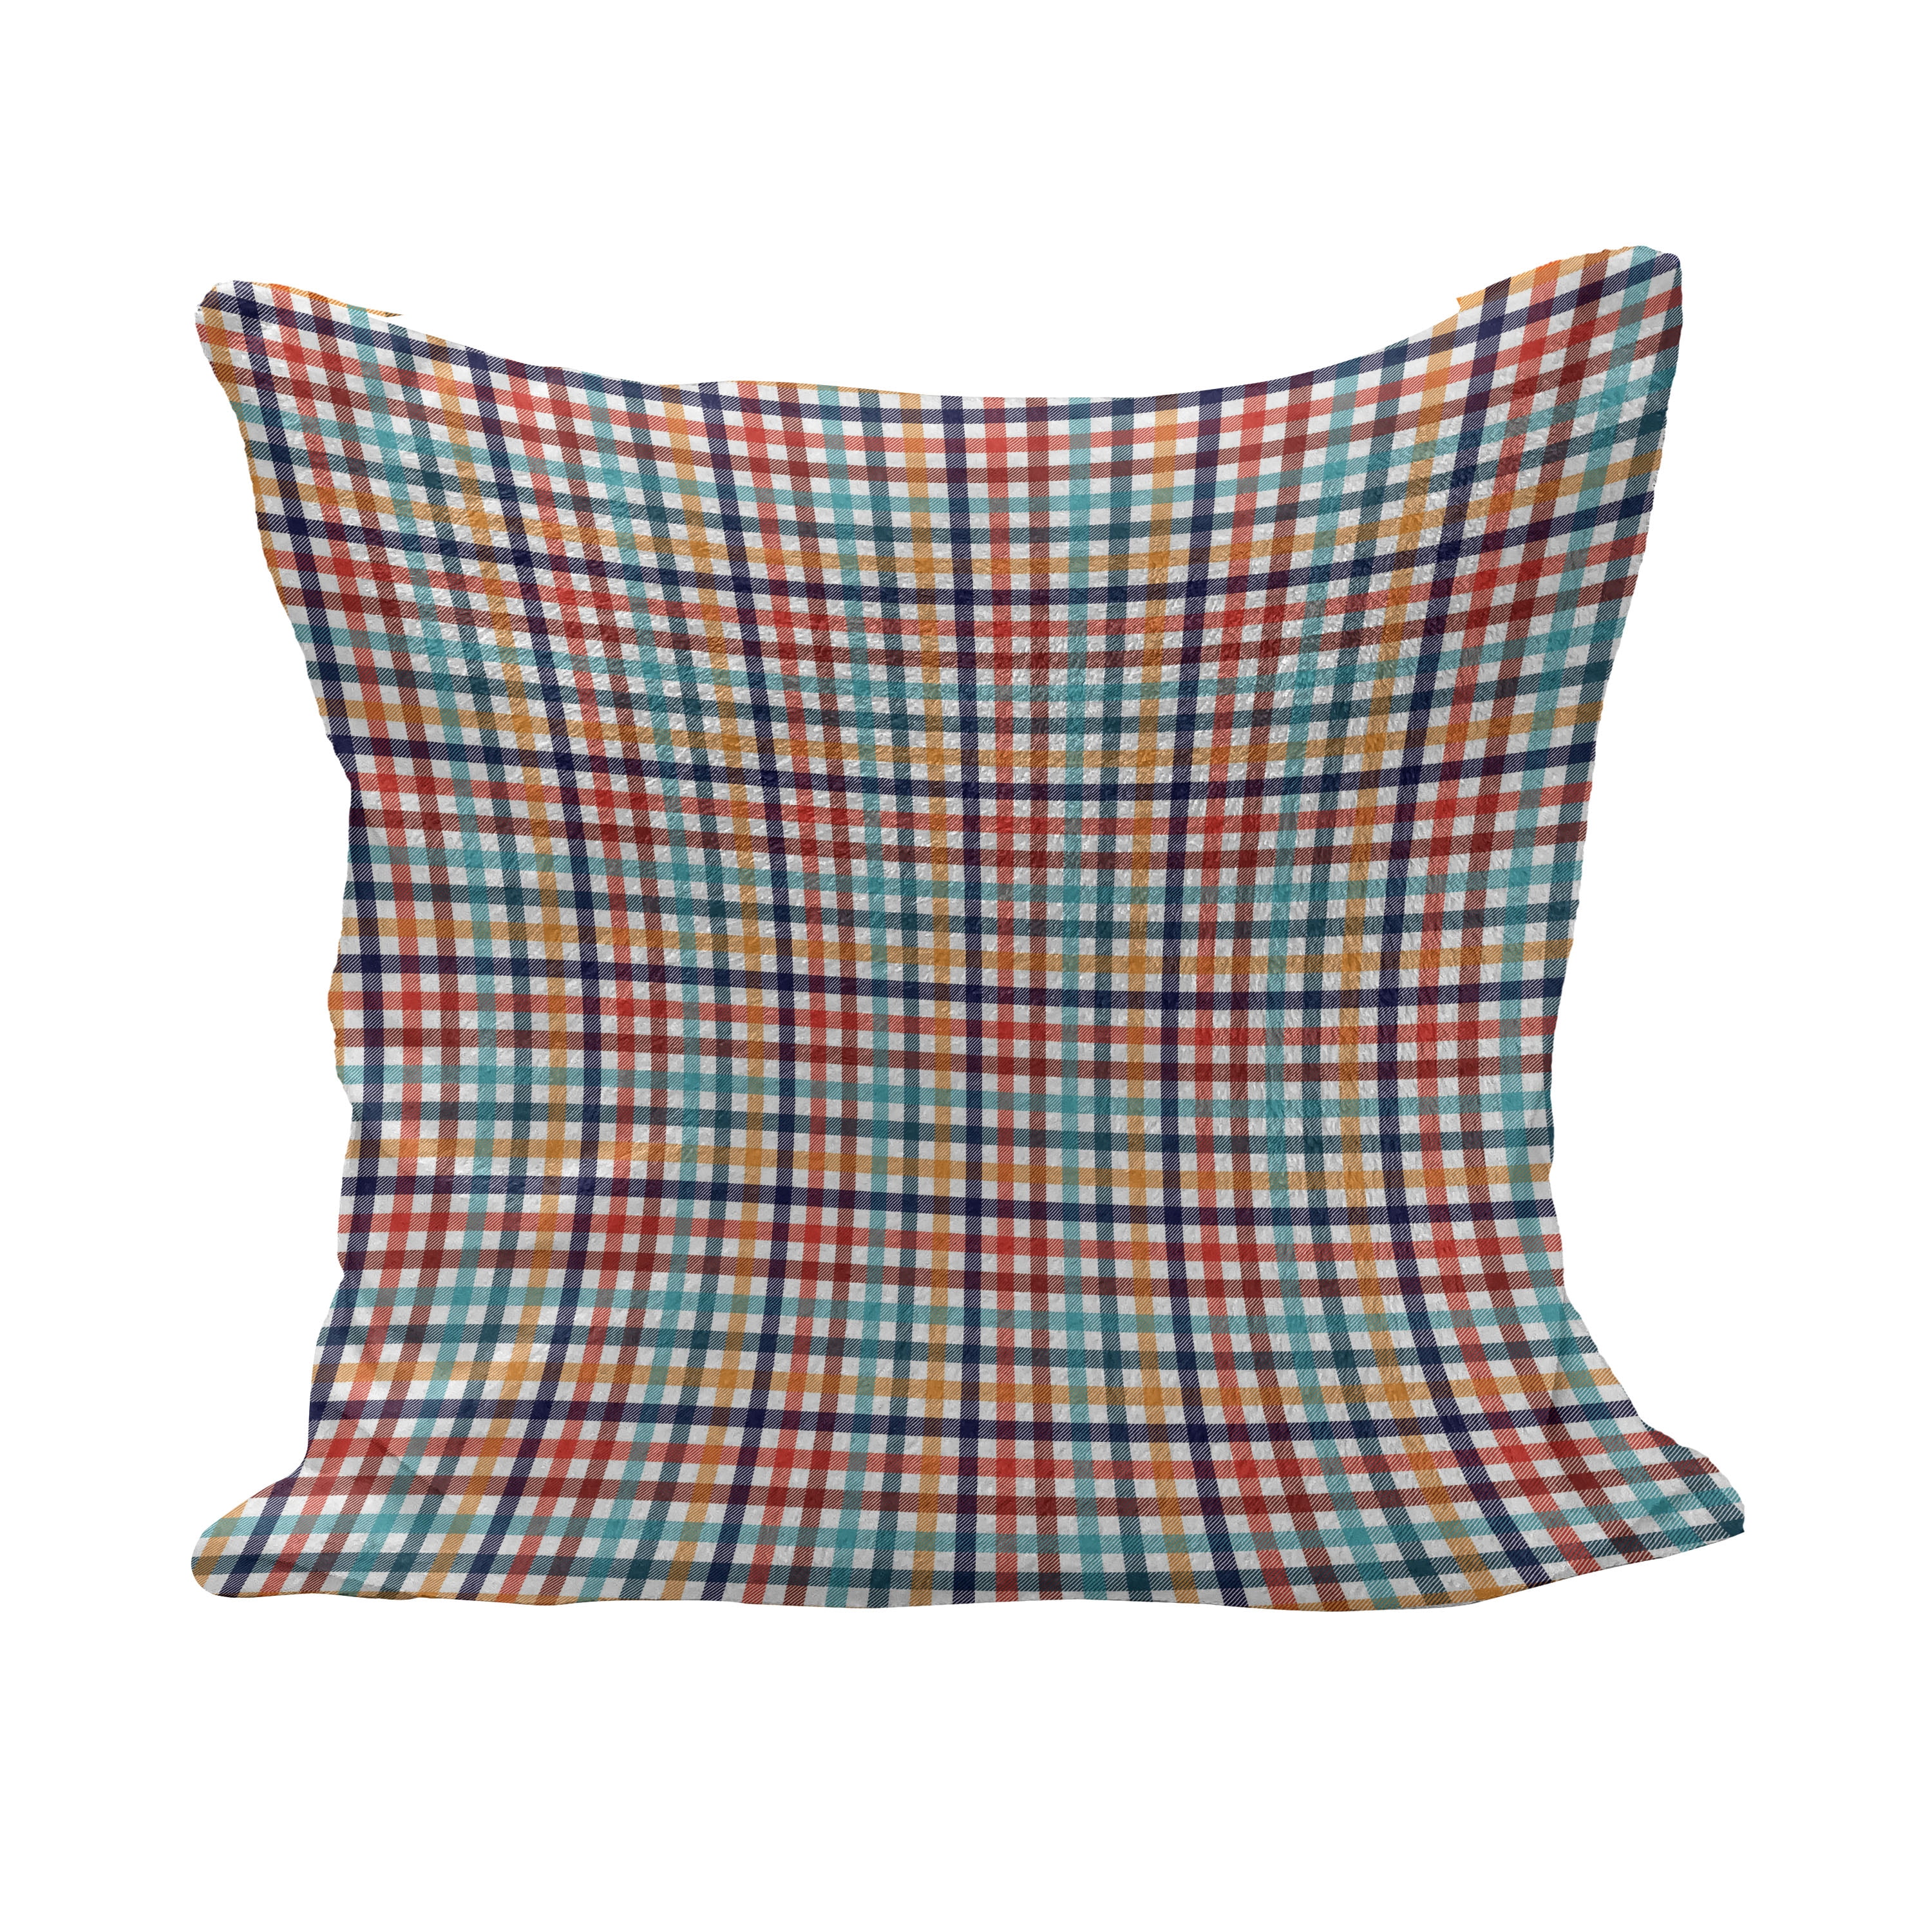 Multicolor Black and White Fall Autumn Checkered Plaid Flannel Gingham Throw Pillow 18x18 